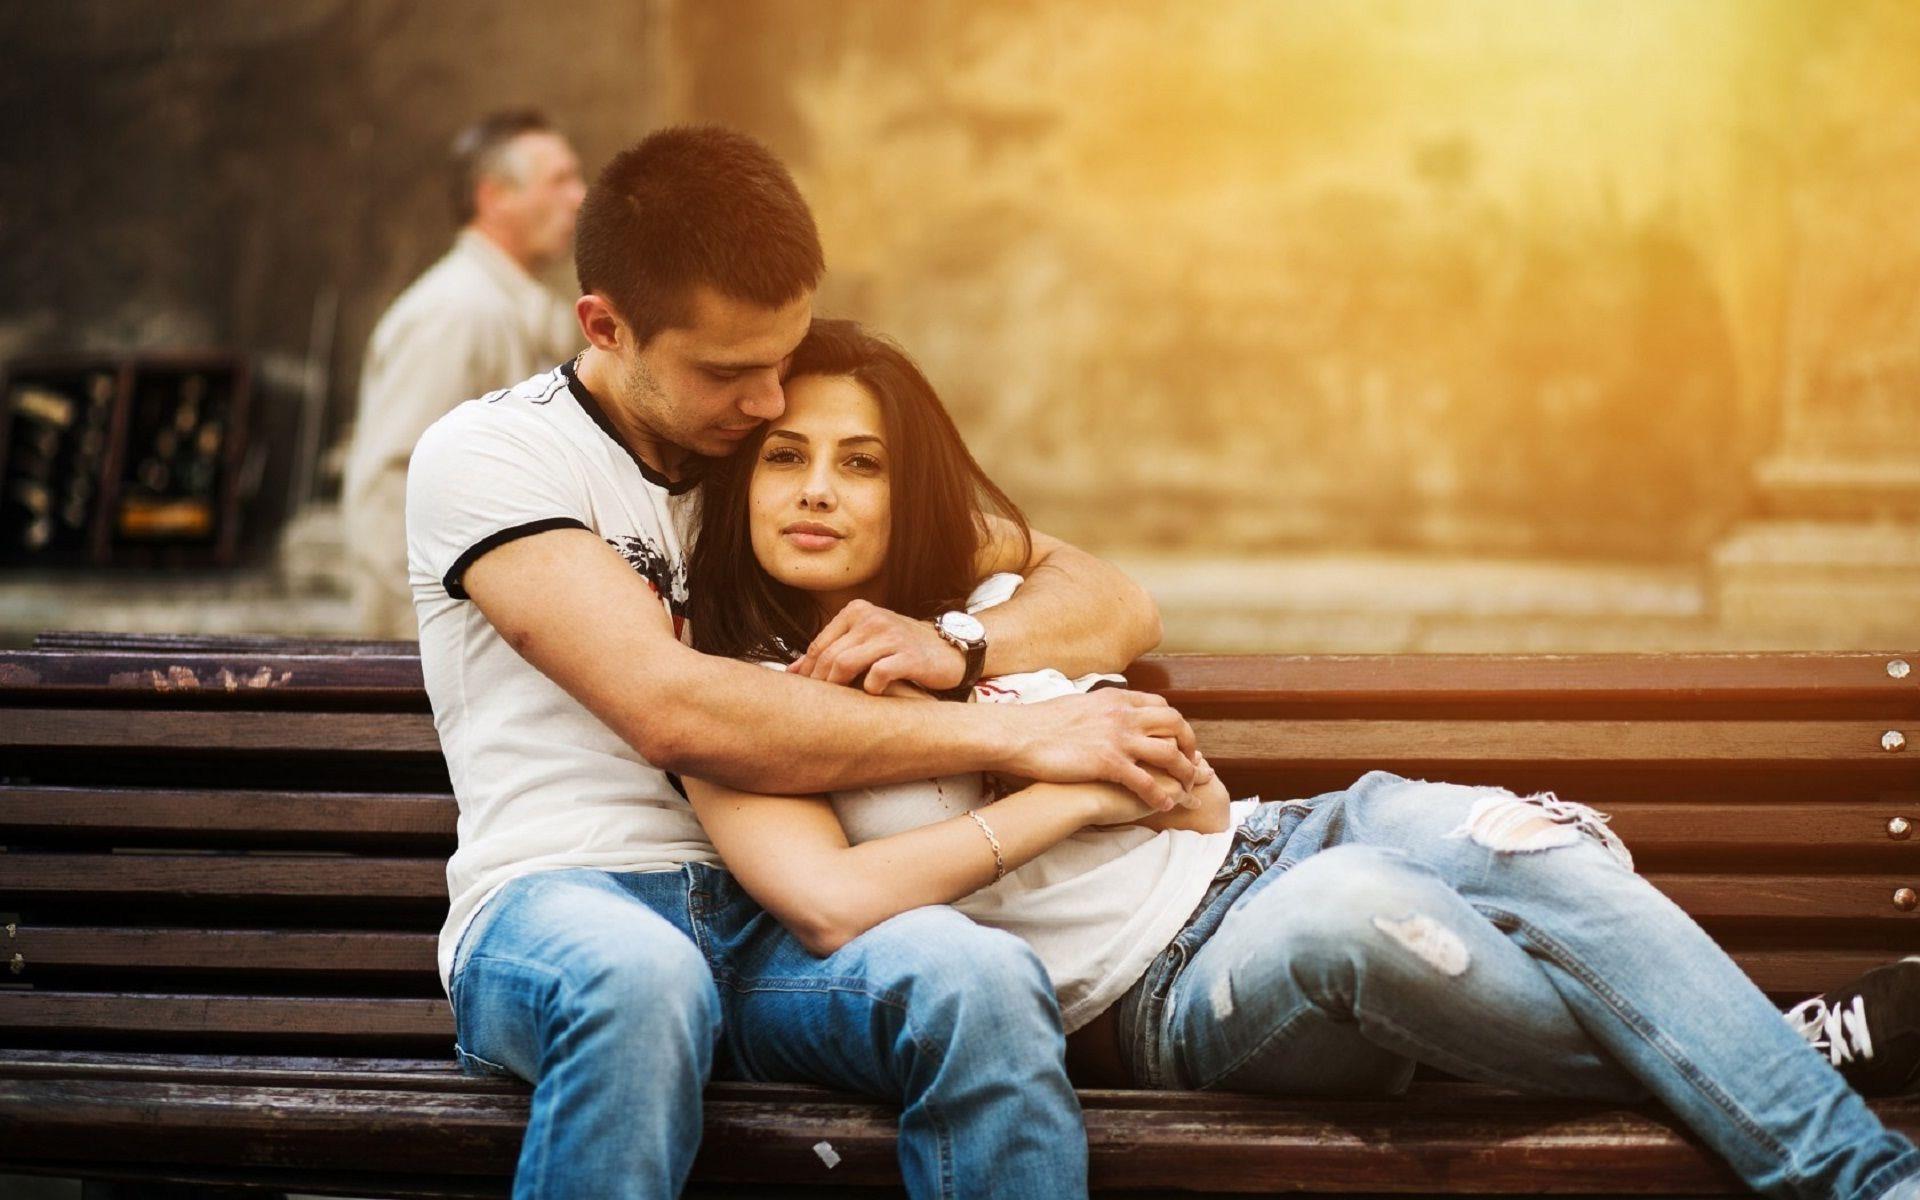 Couple Hugging Full Romantic Picture Cute Couples 92 Relationship